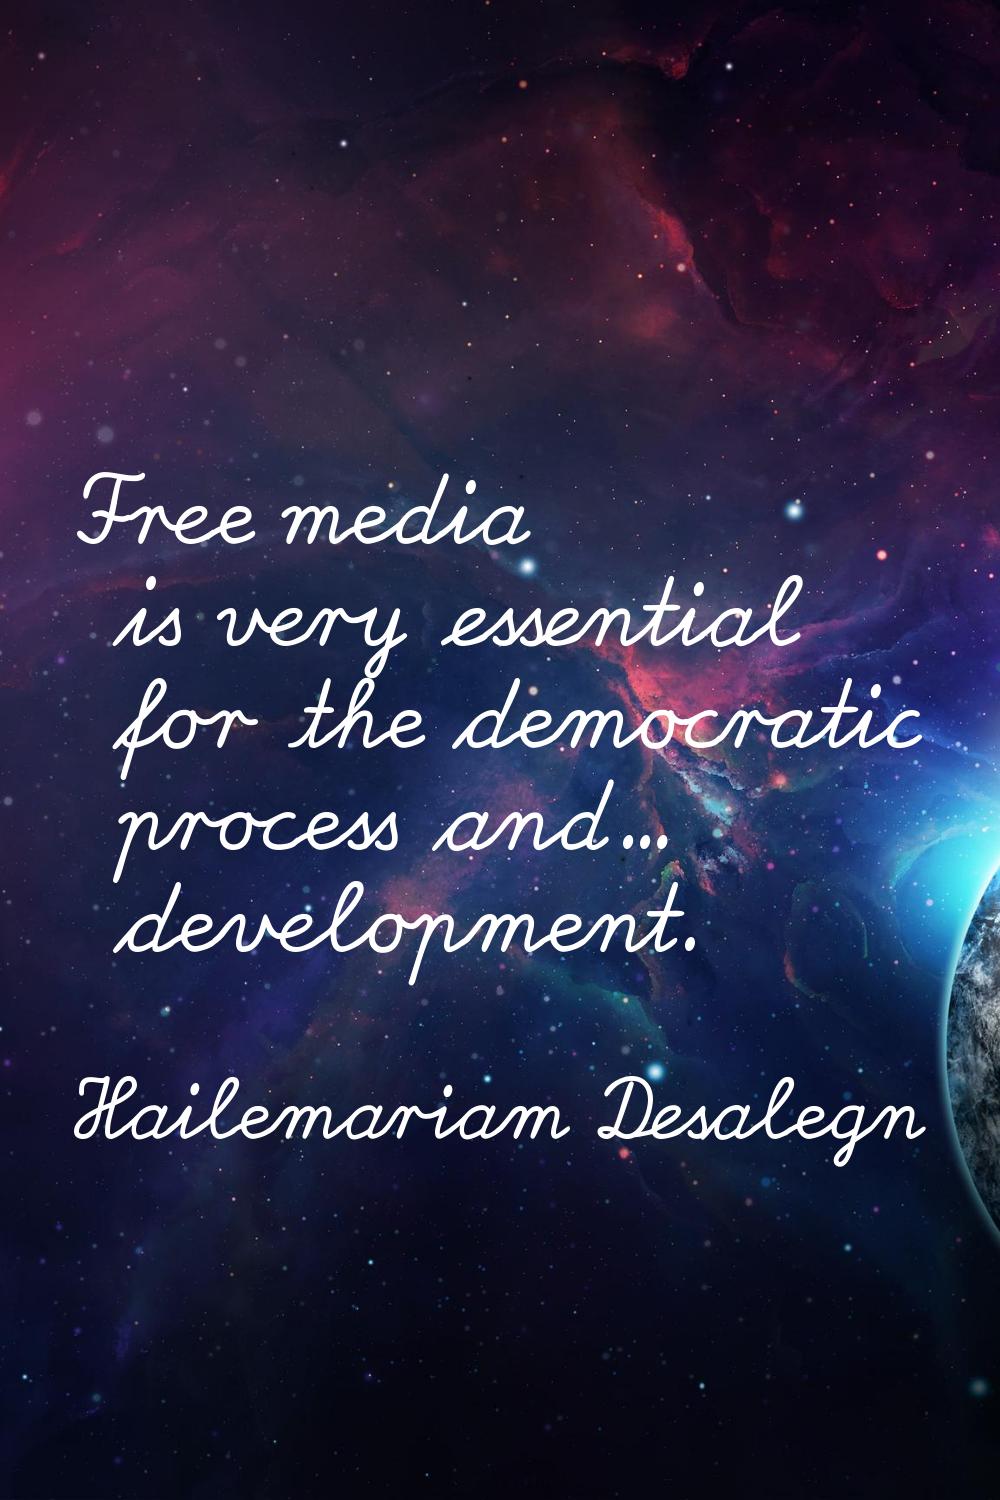 Free media is very essential for the democratic process and... development.